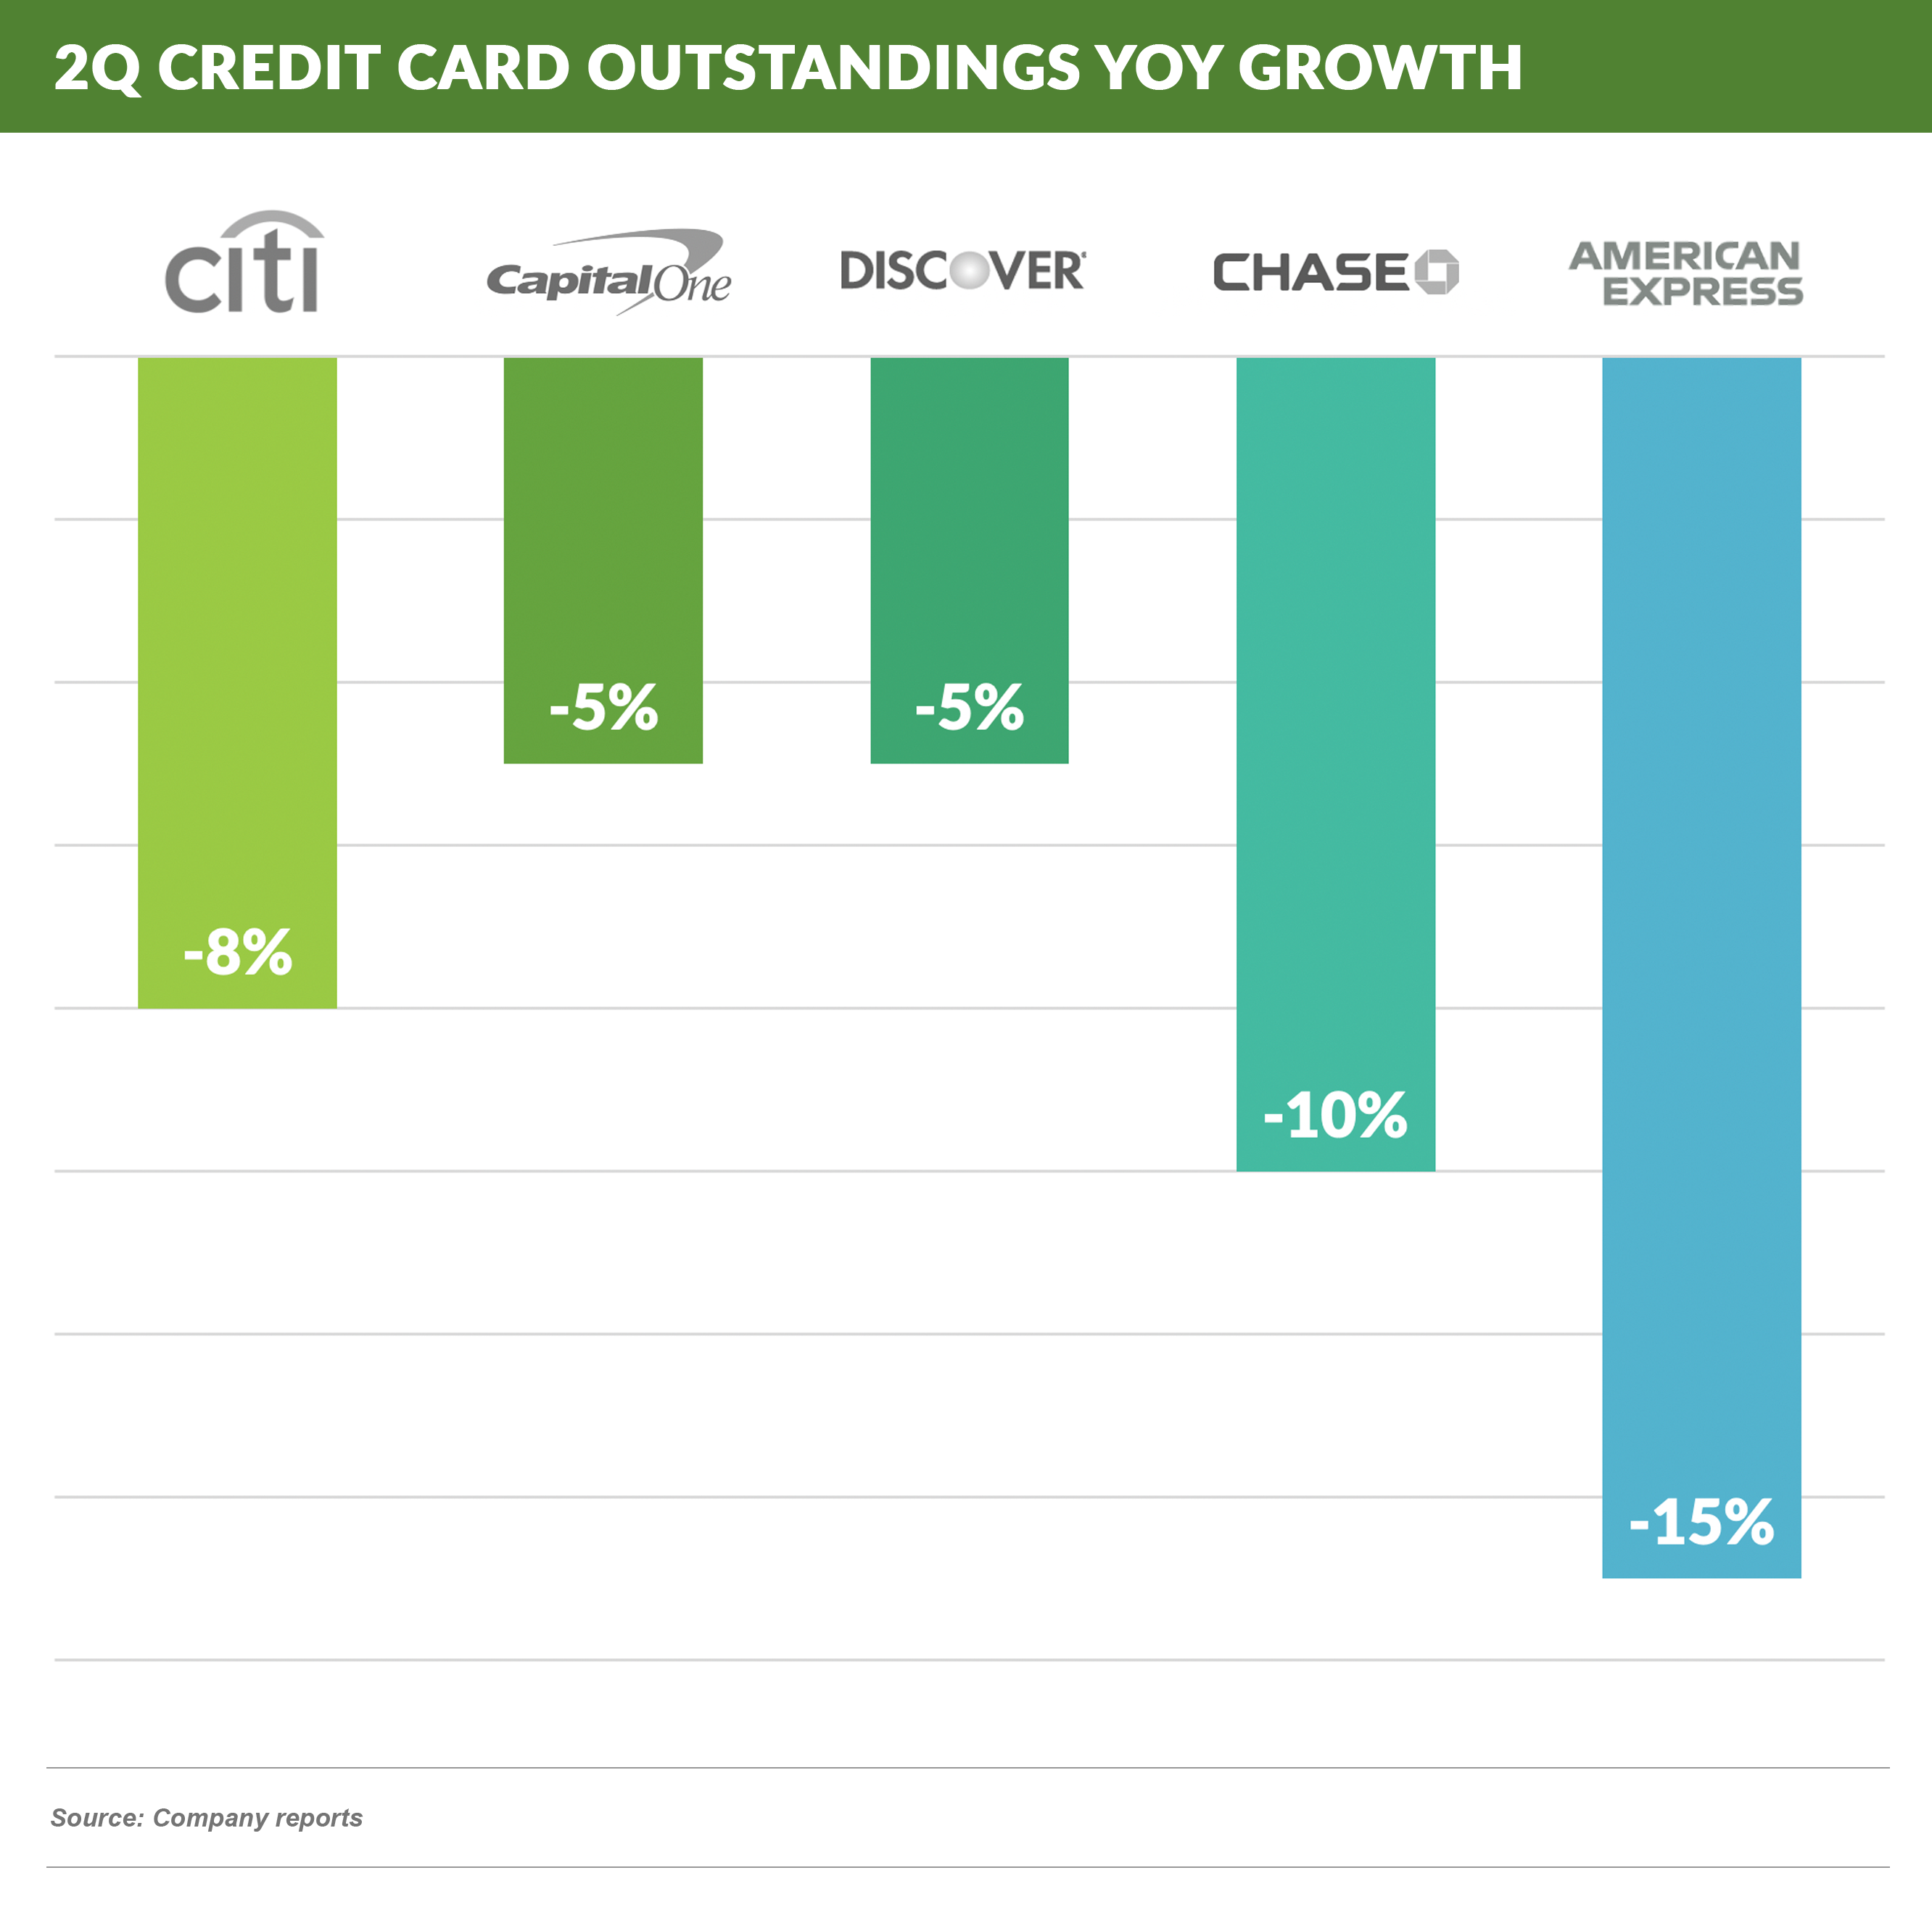 2Q Credit Card Outstandings YOY Growth